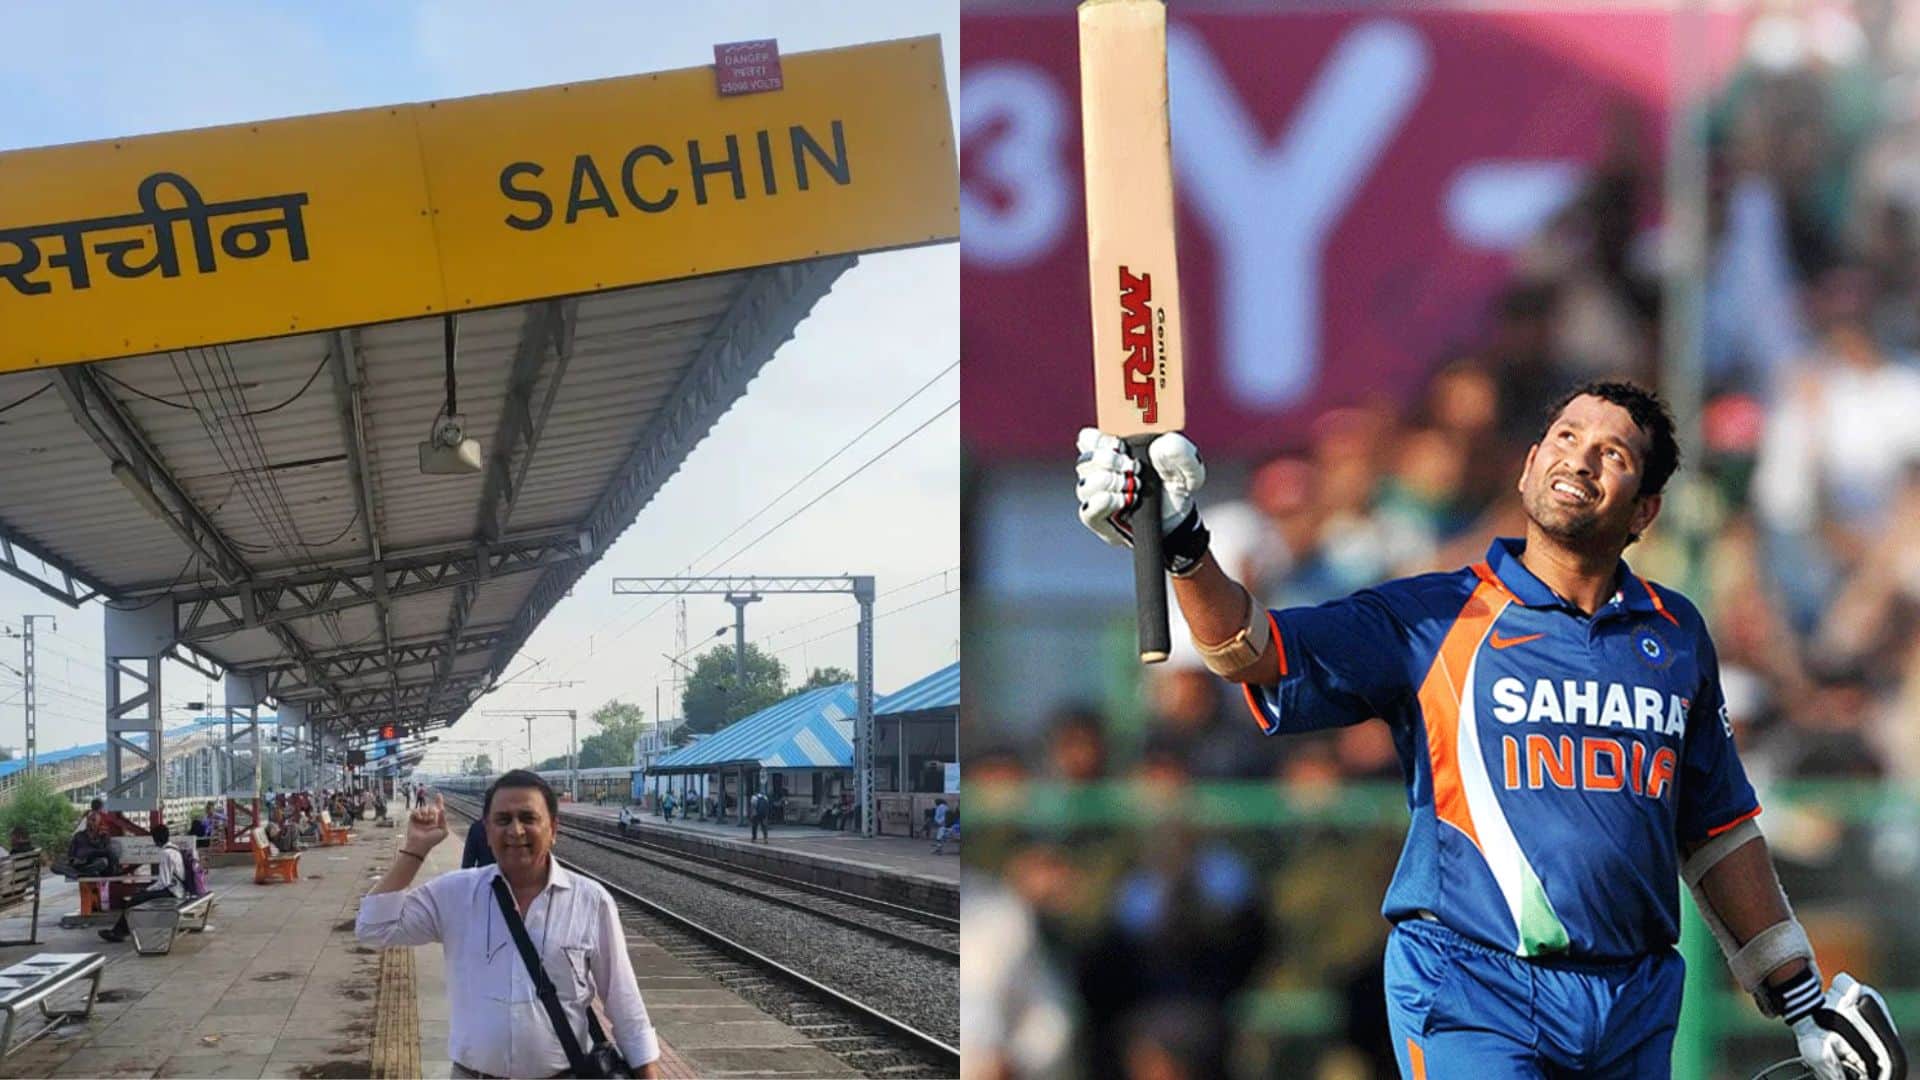 ‘Weather At Sachin Is Sunny’ - Tendulkar Gives Cheeky Reply To Gavaskar In Awesome Banter